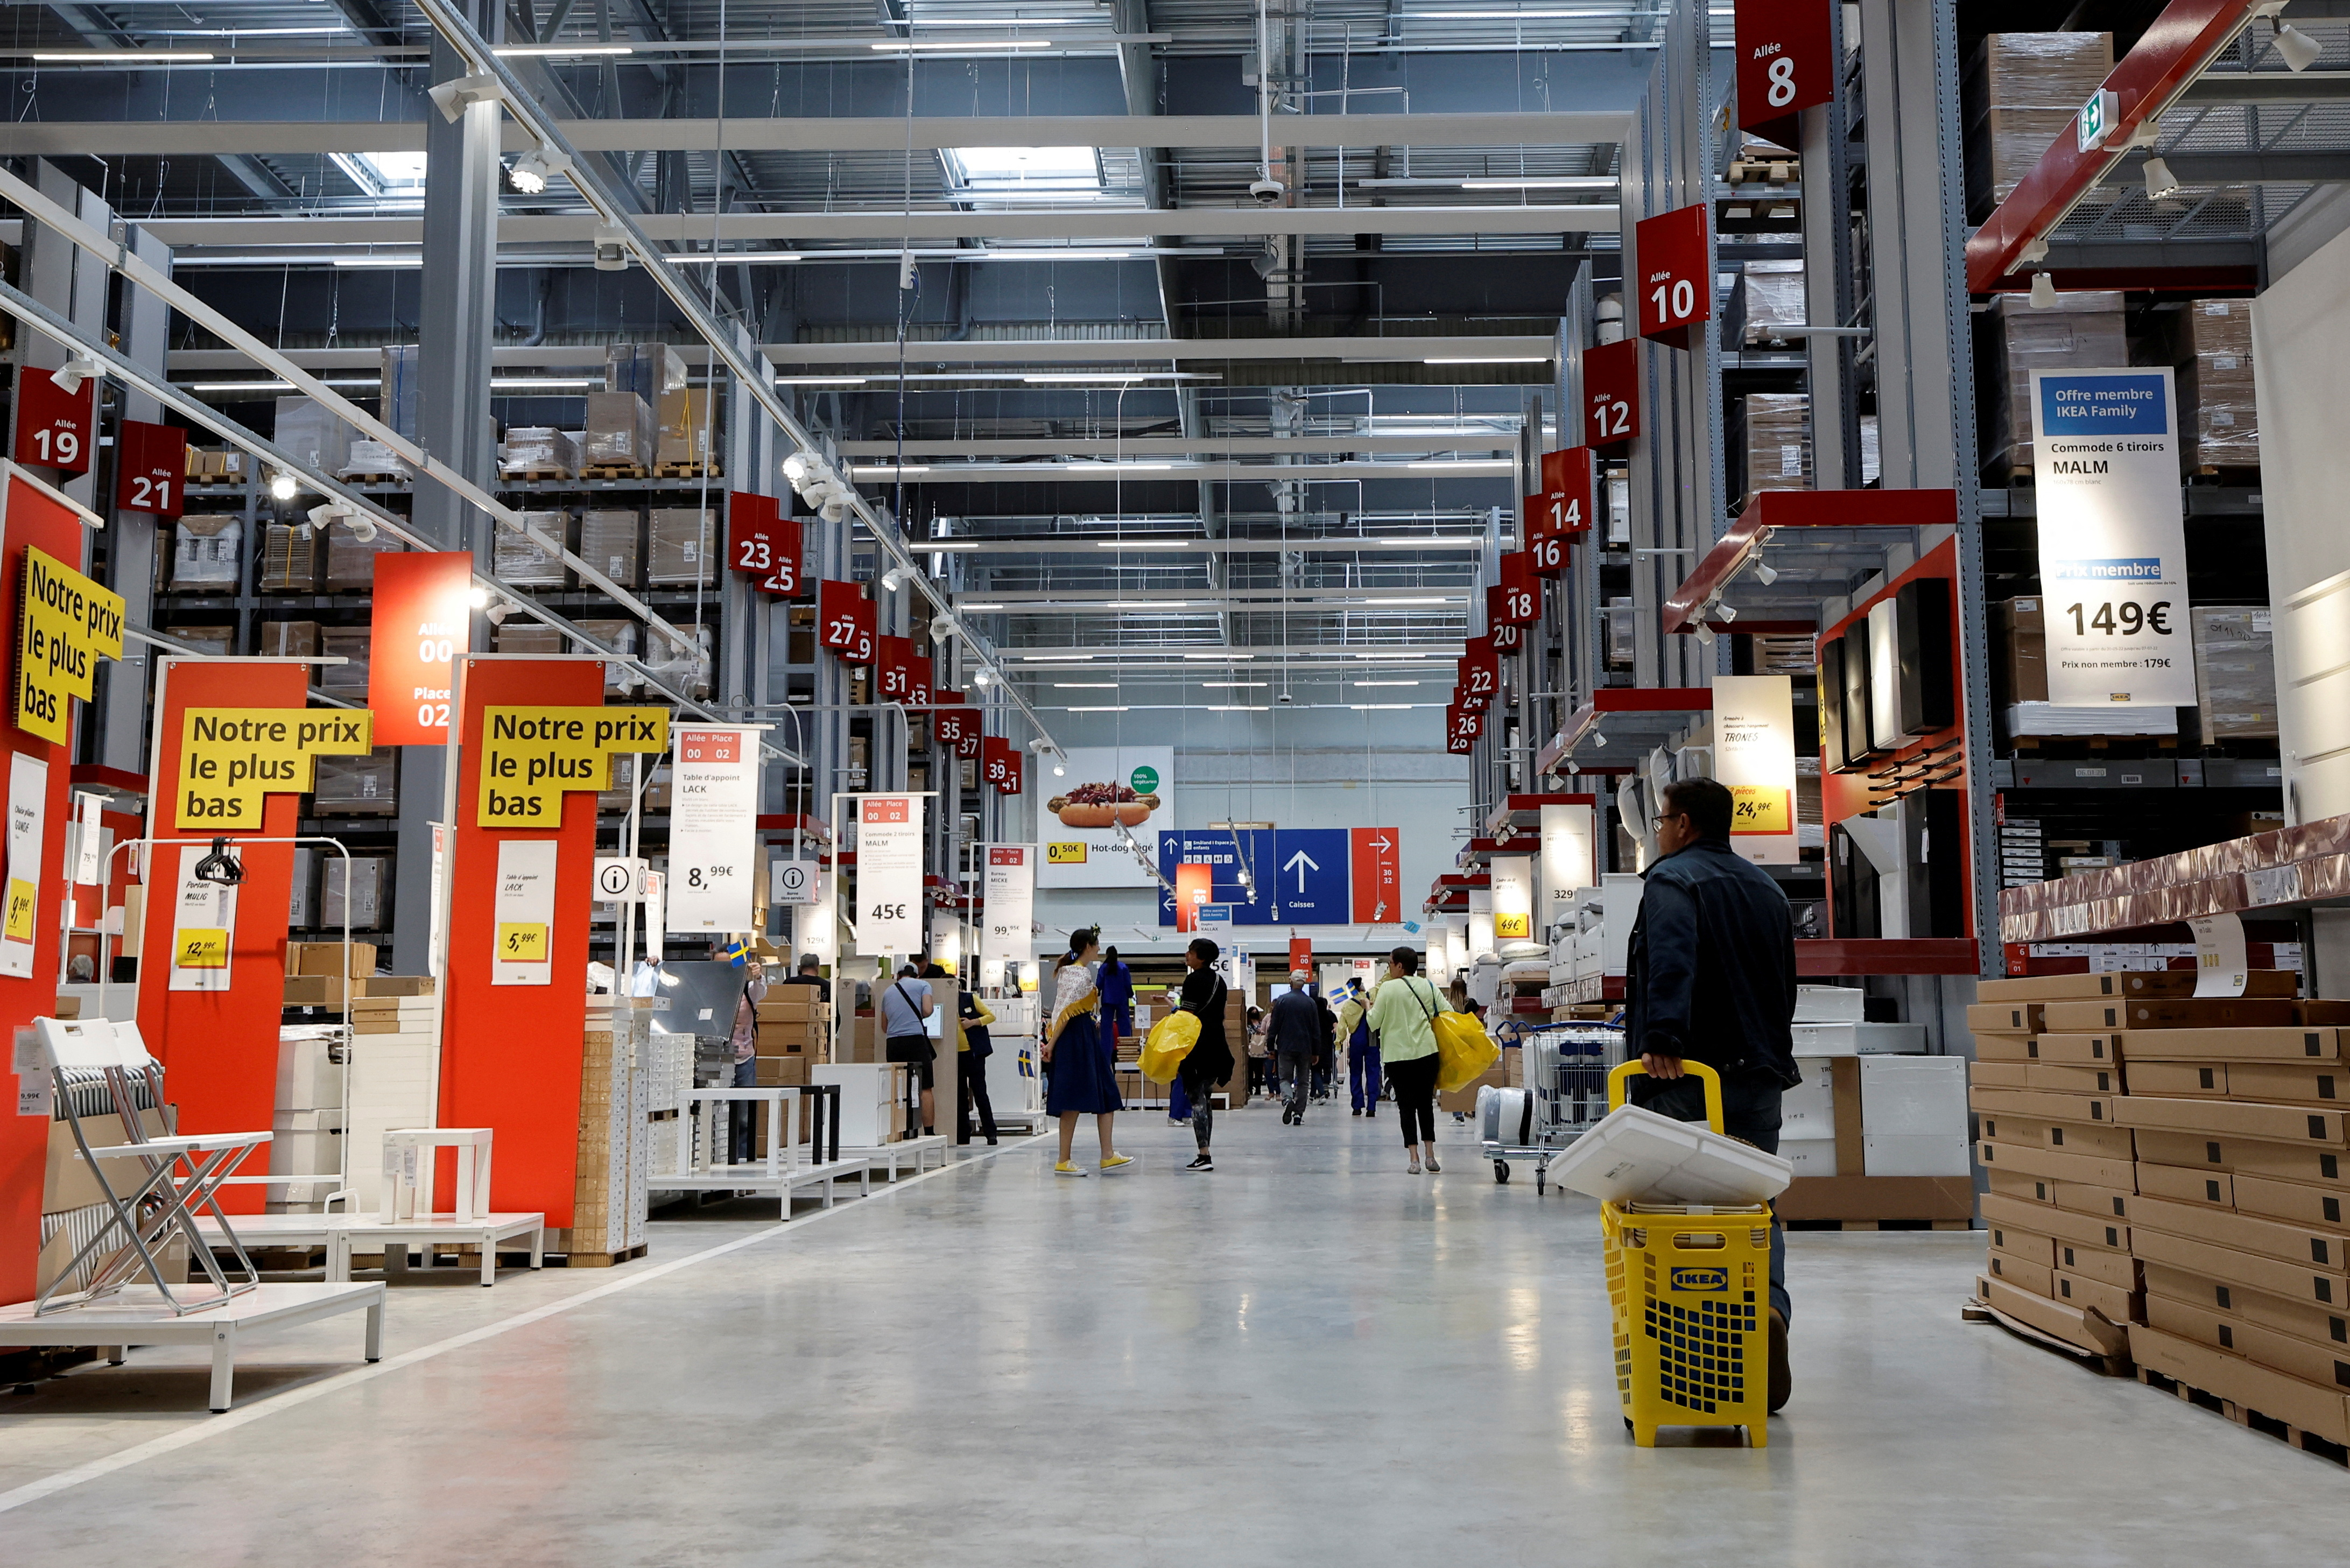 IKEA reports record sales as price hikes offset weakening consumer